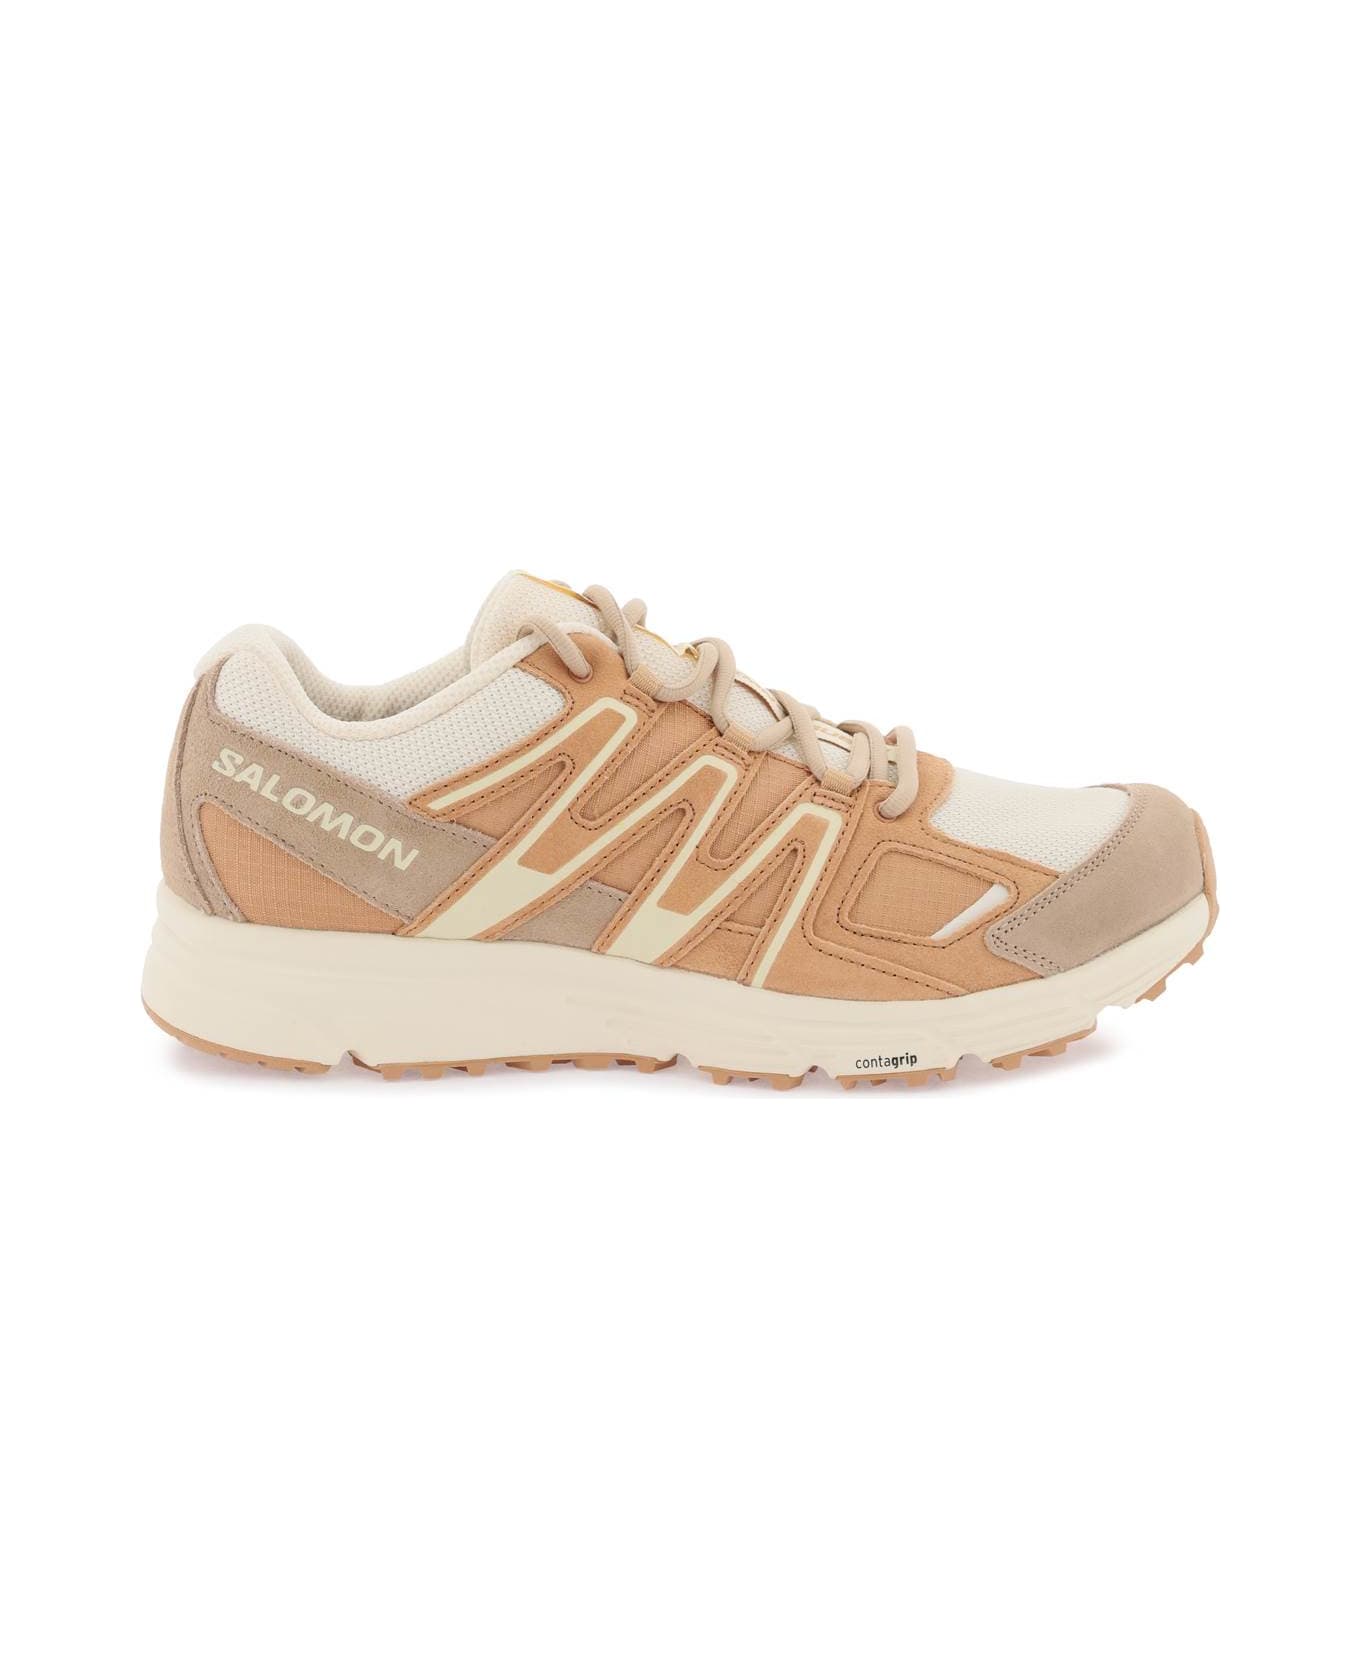 Salomon X-mission 4 Suede Sneakers - NATURAL SANDSTORM BLEACHED SAND (White)